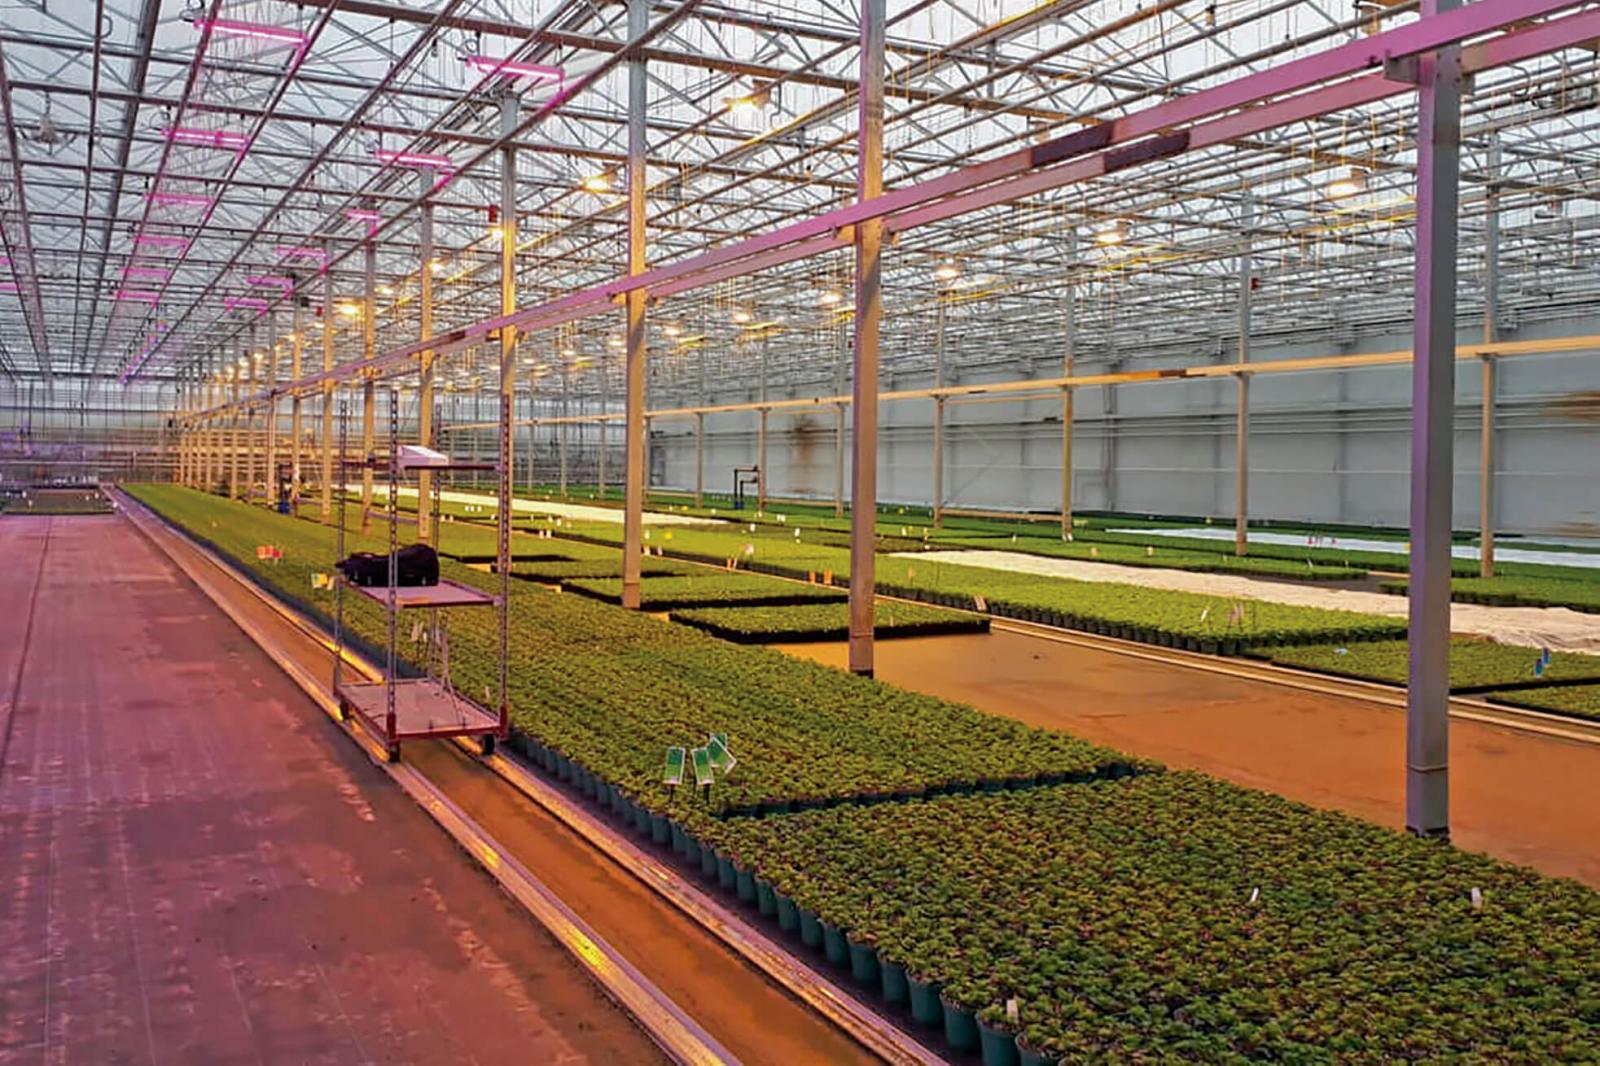 Dr. Youbin Zheng of the University of Guelph is studying the use of LEDs to improve ornamental crop production.